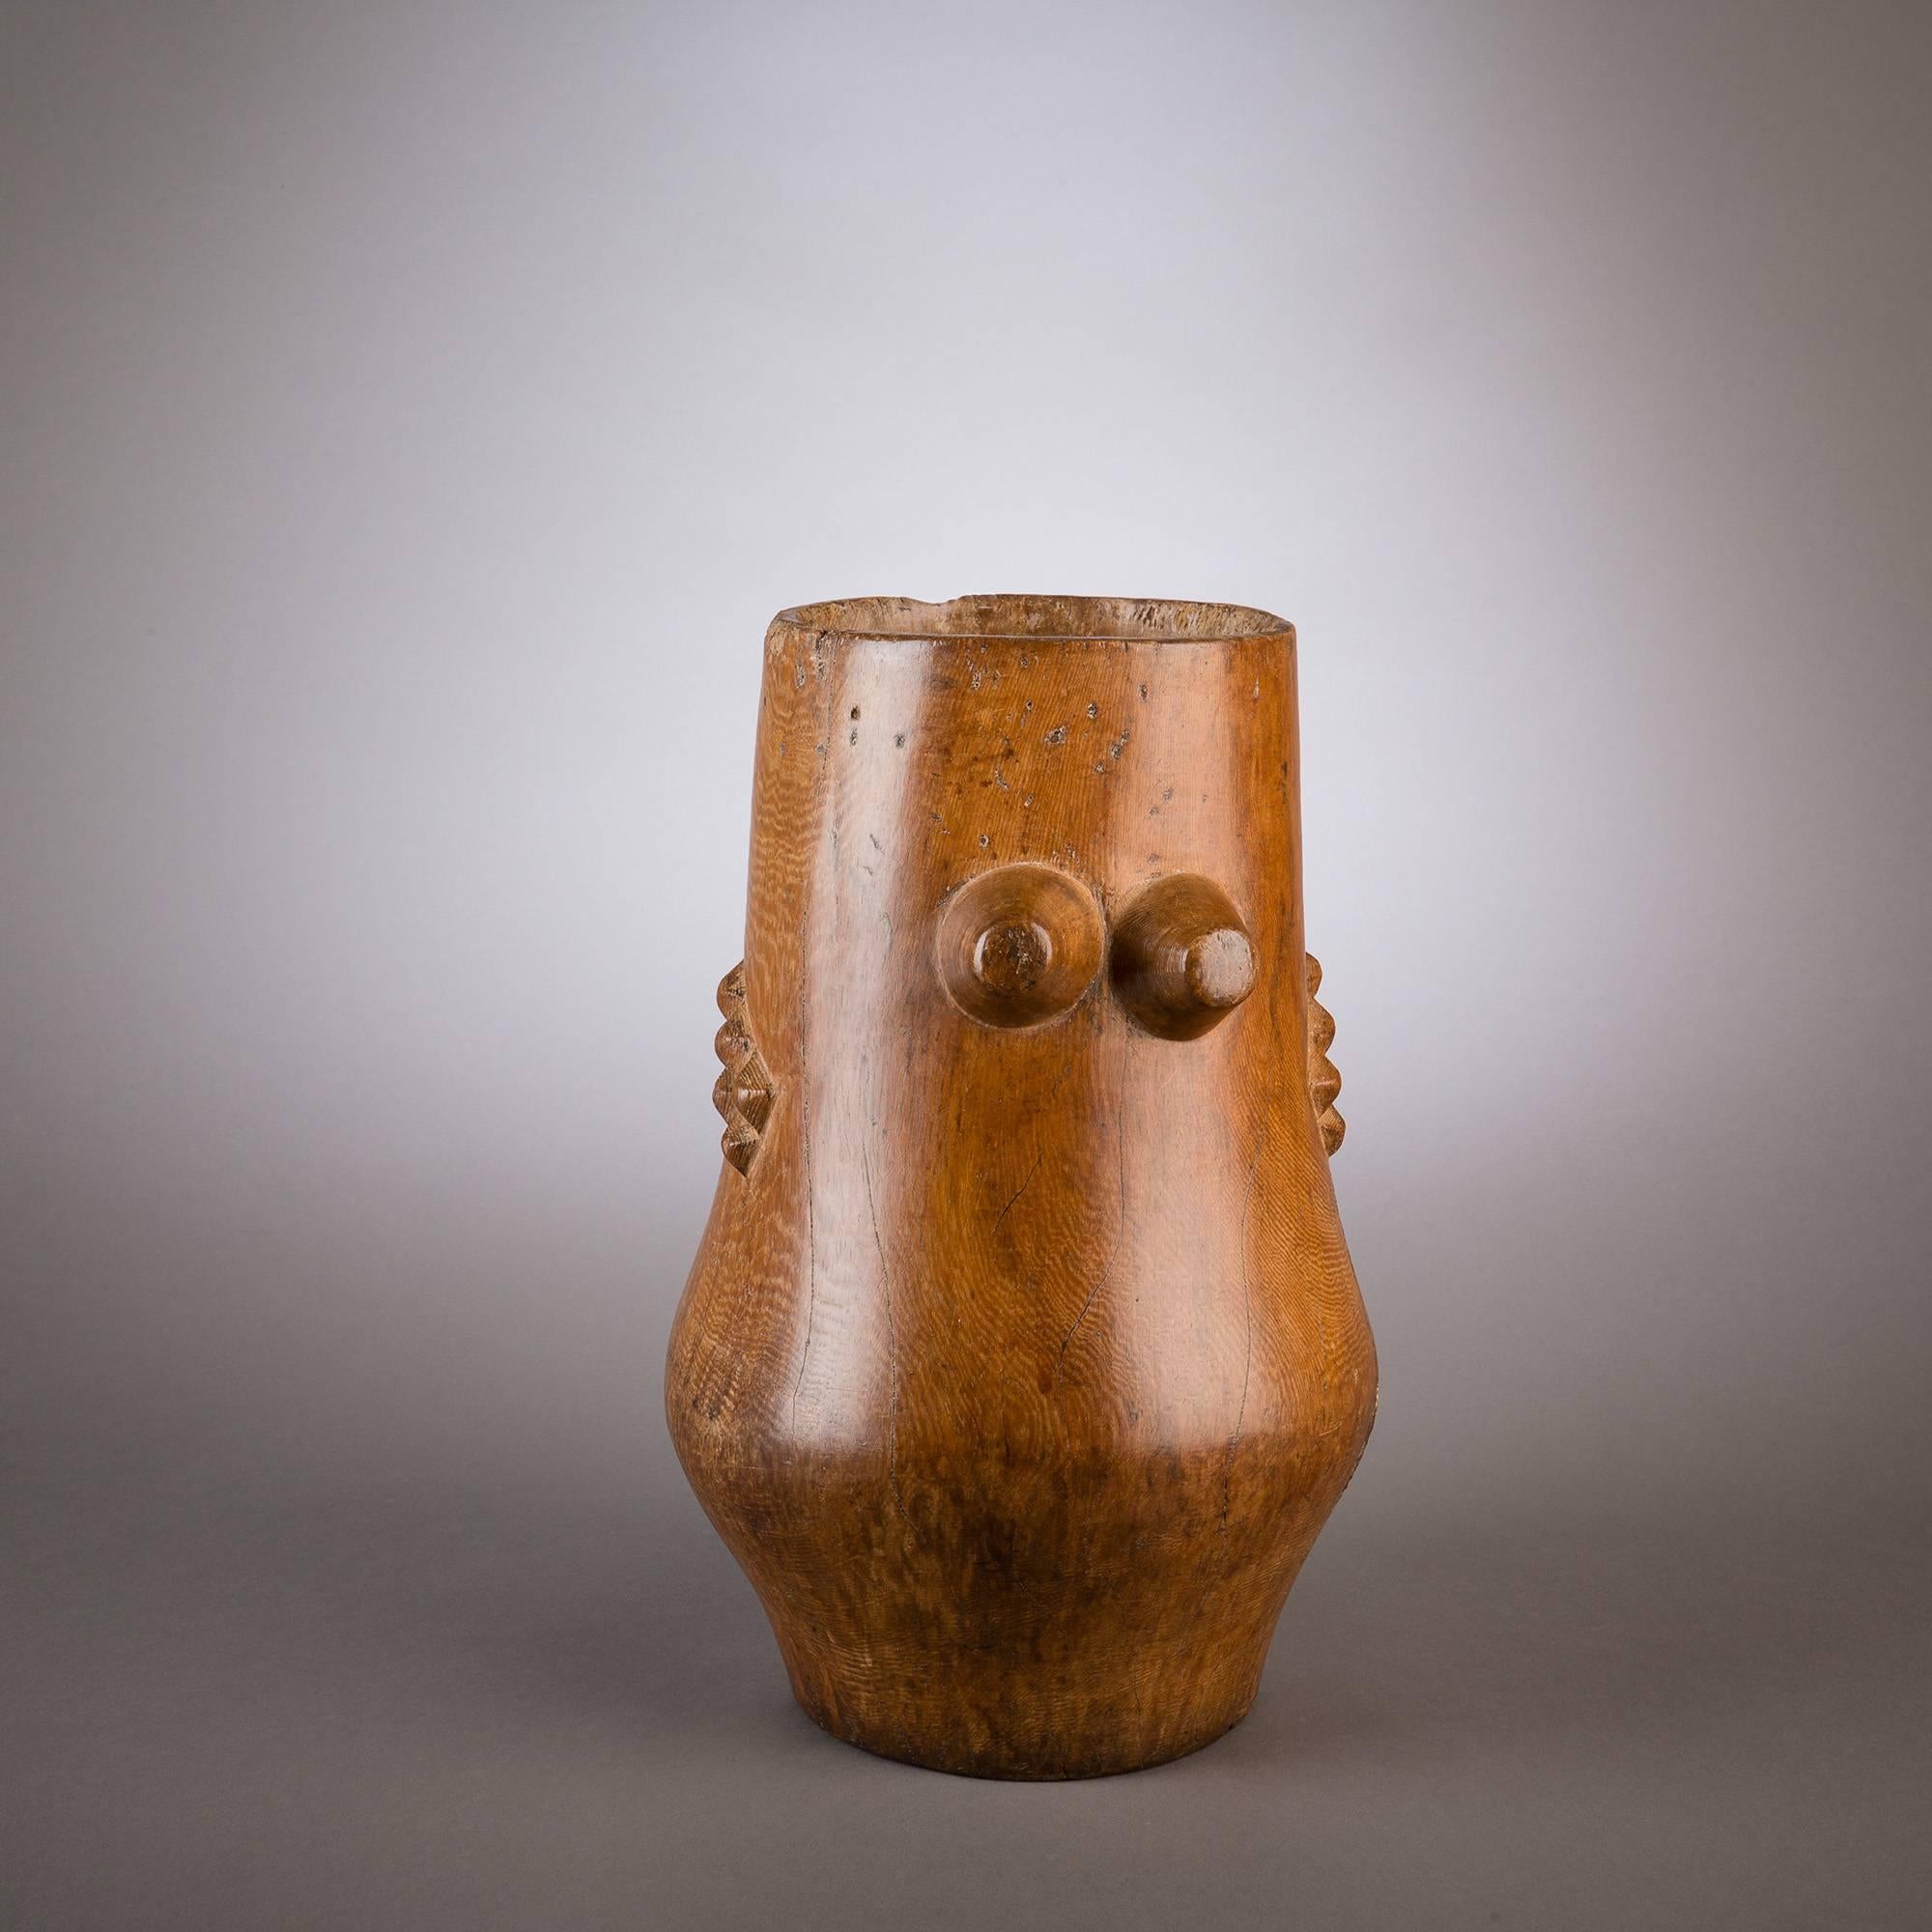 Handsome milk pails such as this example were made by highly skilled Zulu carvers and were commissioned by the heads of homesteads. This beautiful pail contains clear references to the female form. On opposing sides of the vessel are double